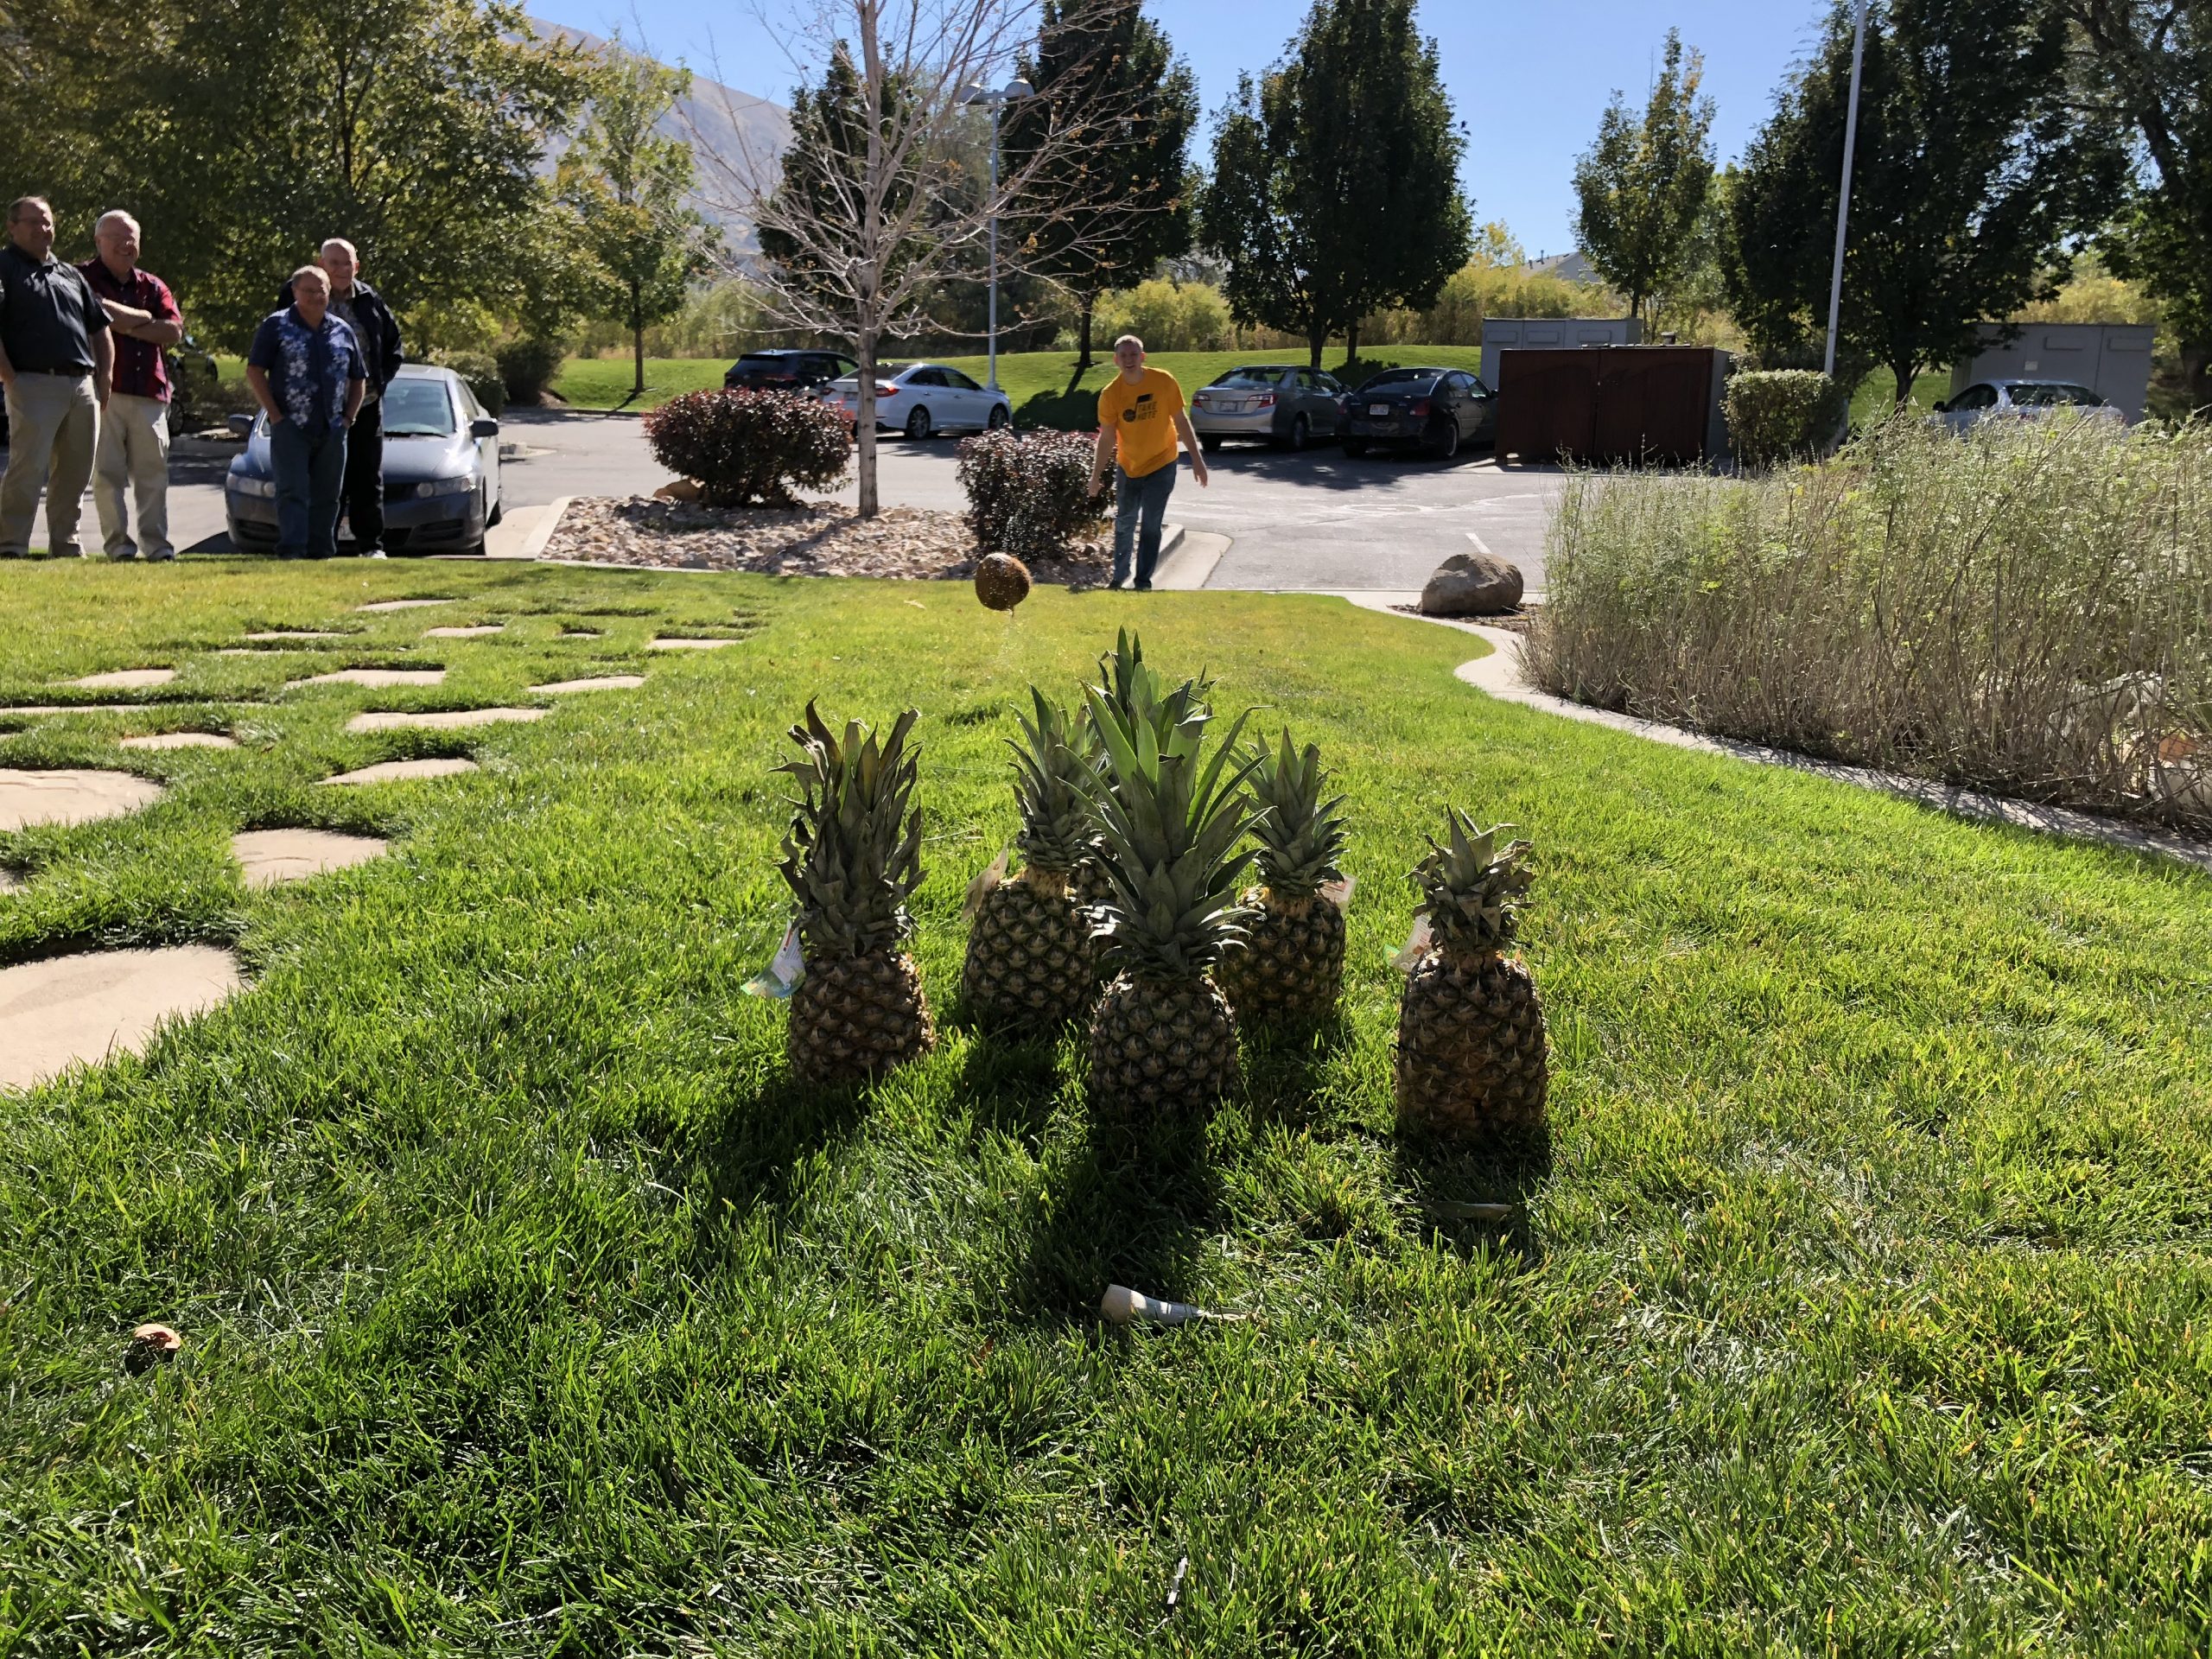 Six pineapples lined up in the grass as a man throws a coconut at them as part of a game, meant to act as pins and a bowling ball.